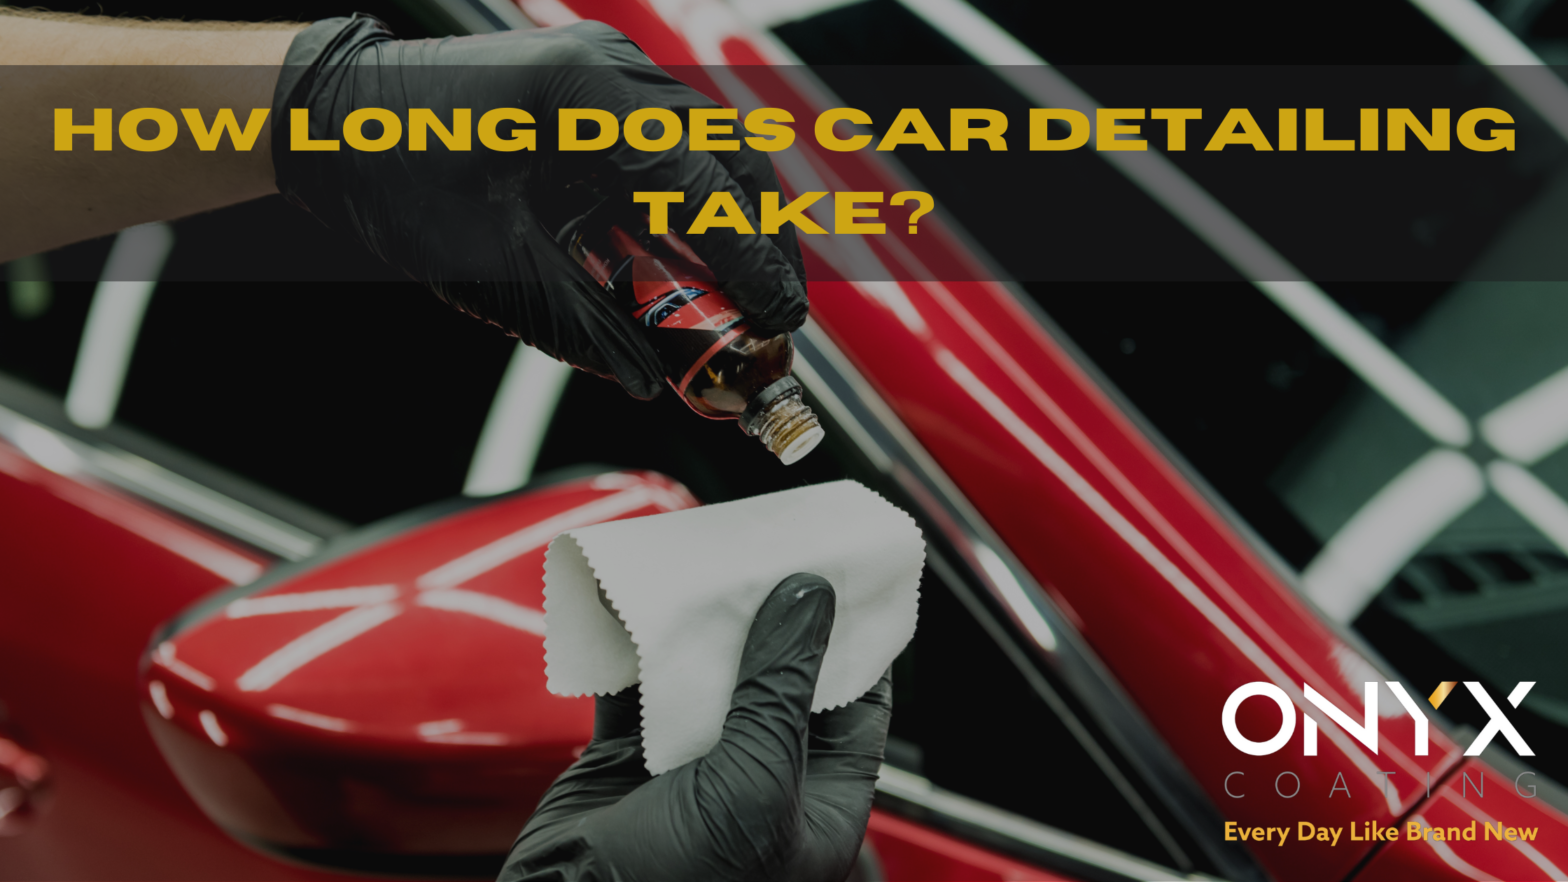 How long does car detailing take?